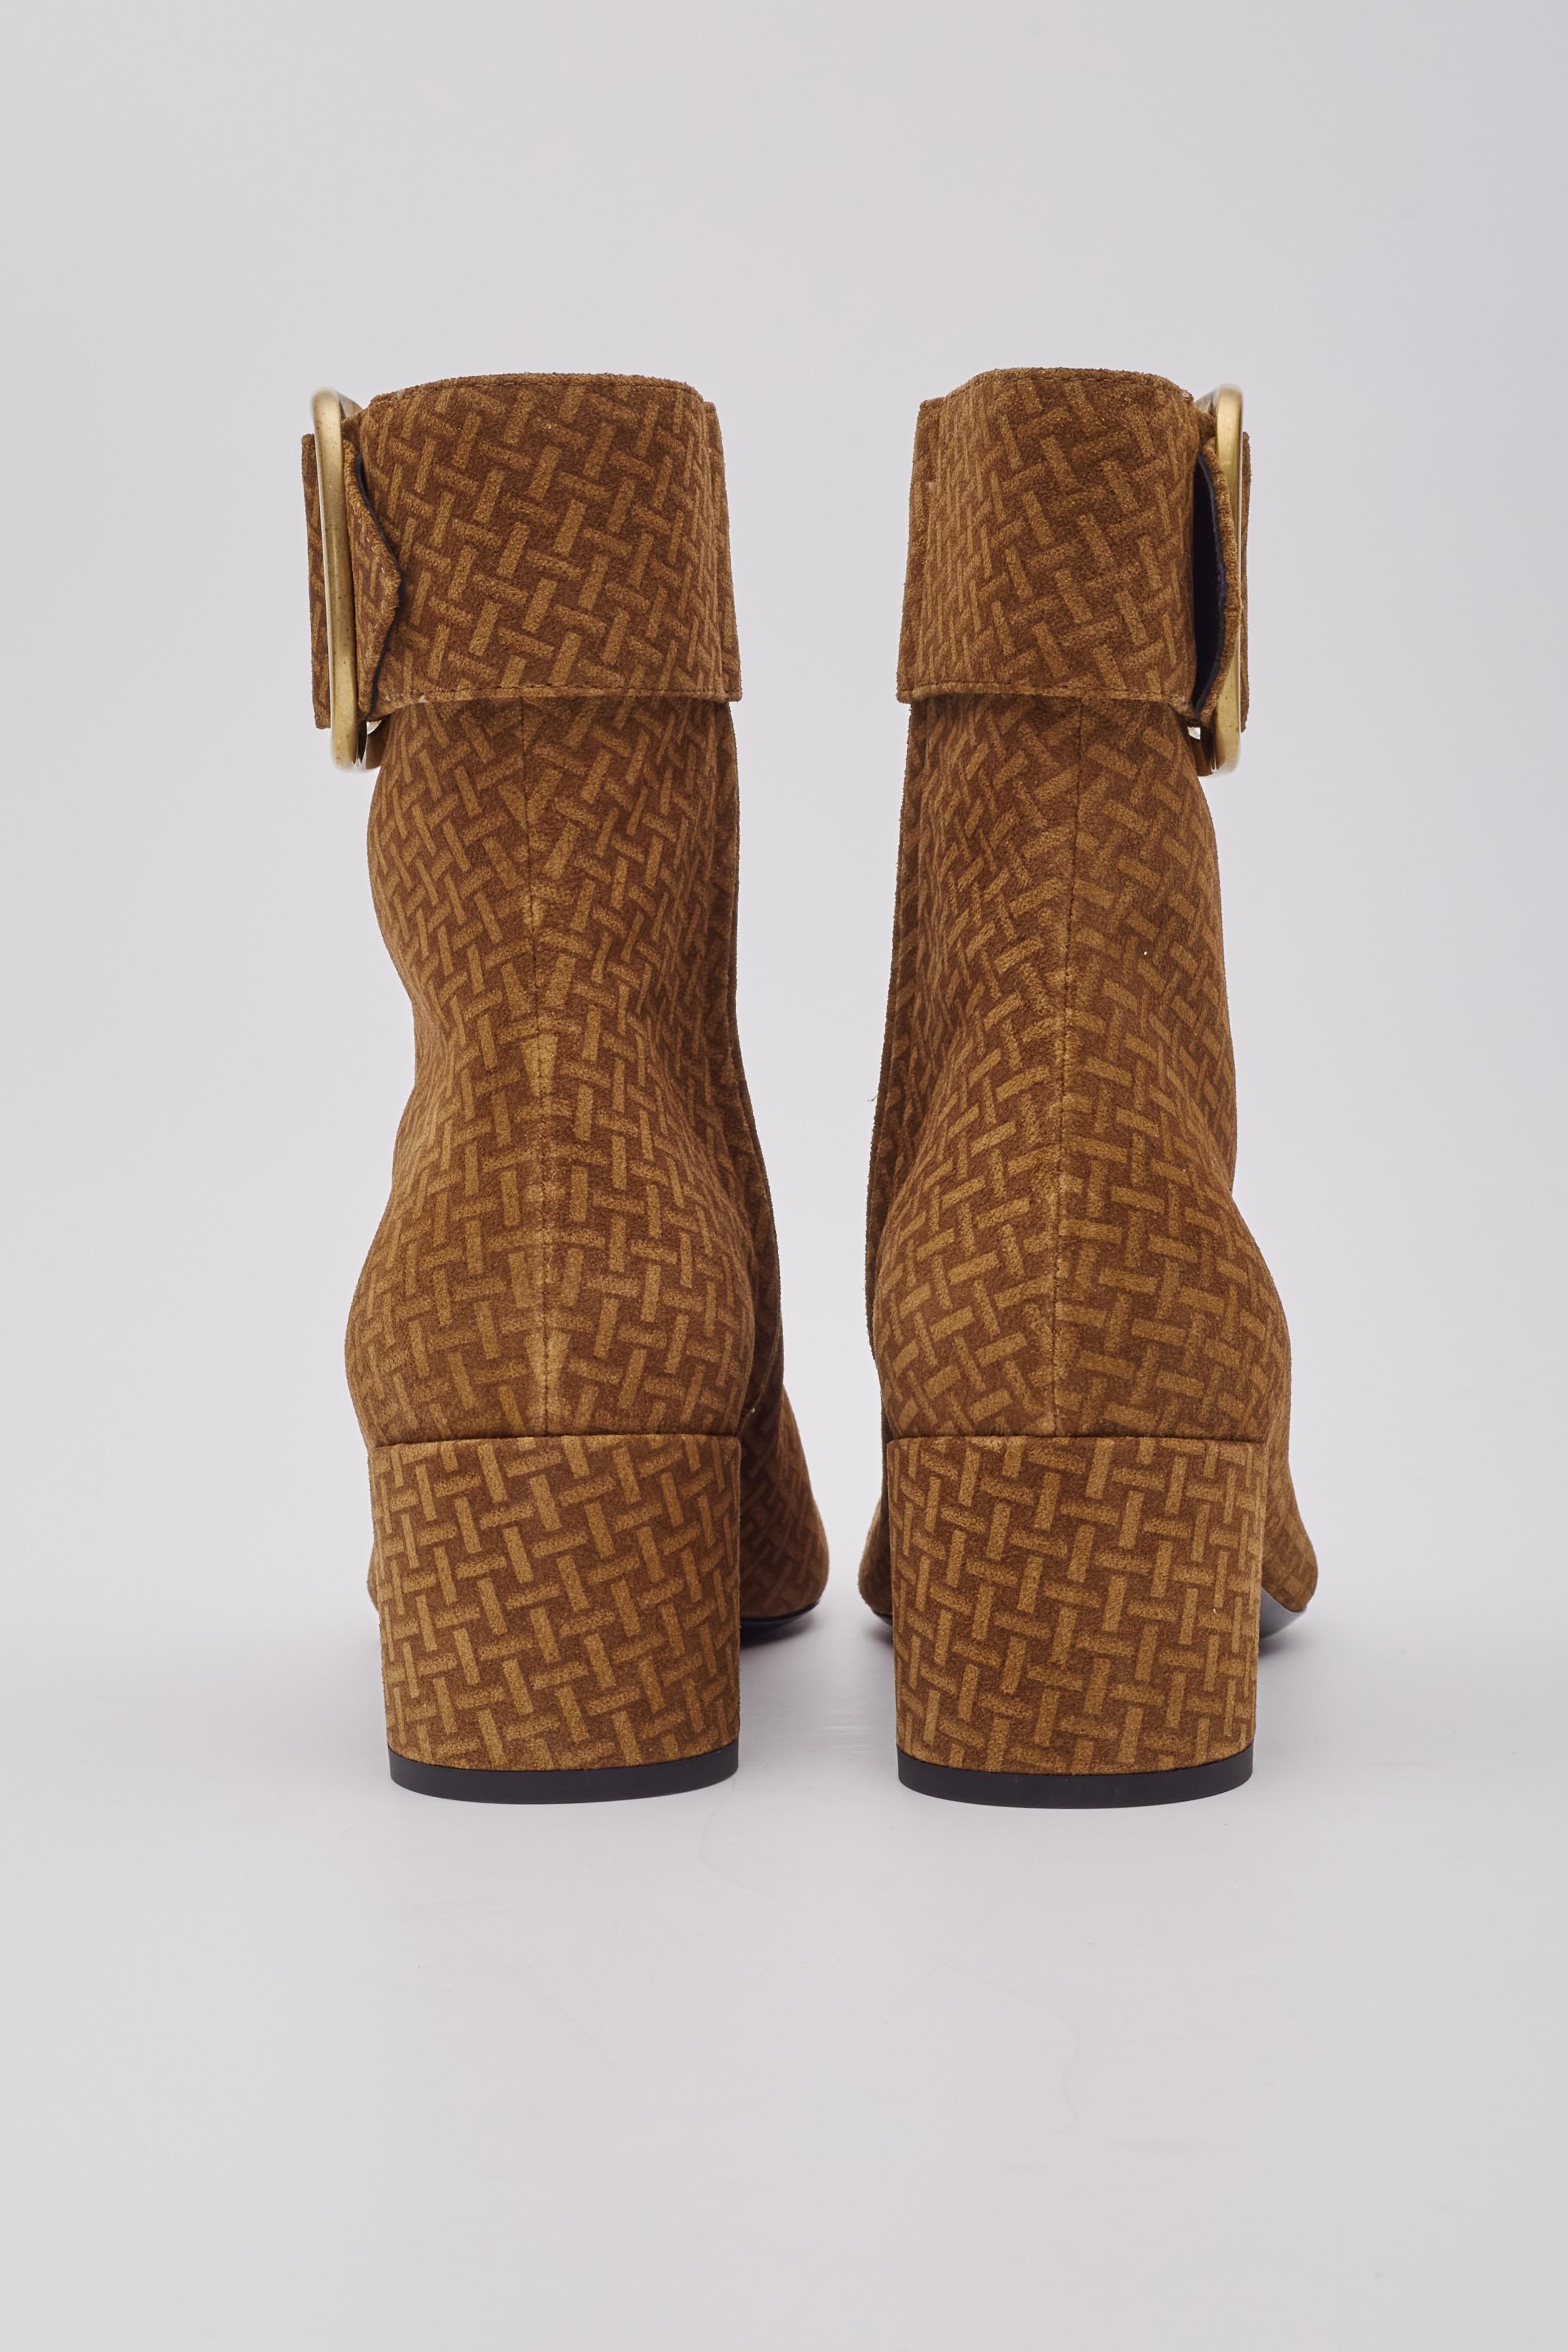 Saint Laurent Suede Leather Braided Print Joplin 50mm Bootie (EU 38) In Excellent Condition For Sale In Montreal, Quebec